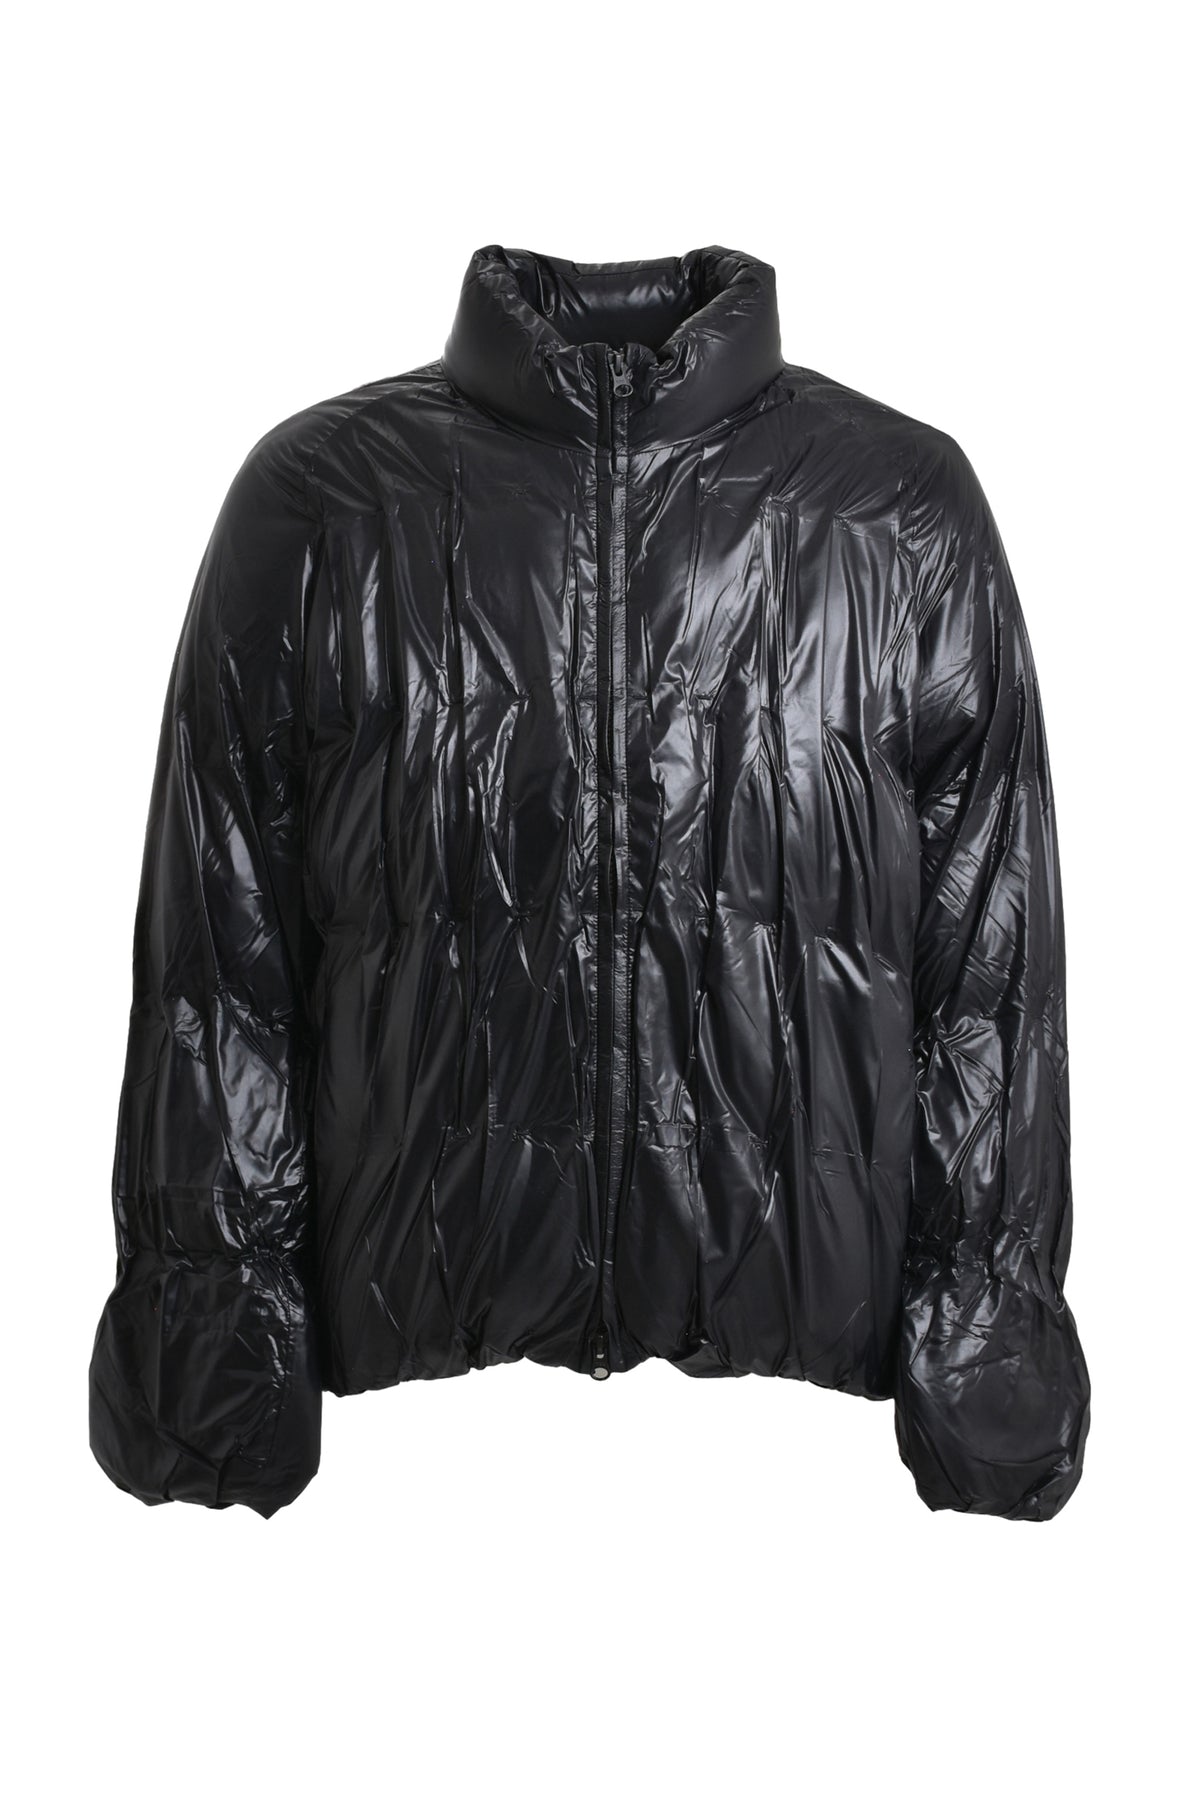 Polyestepost archive faction 4.0＋Jacket